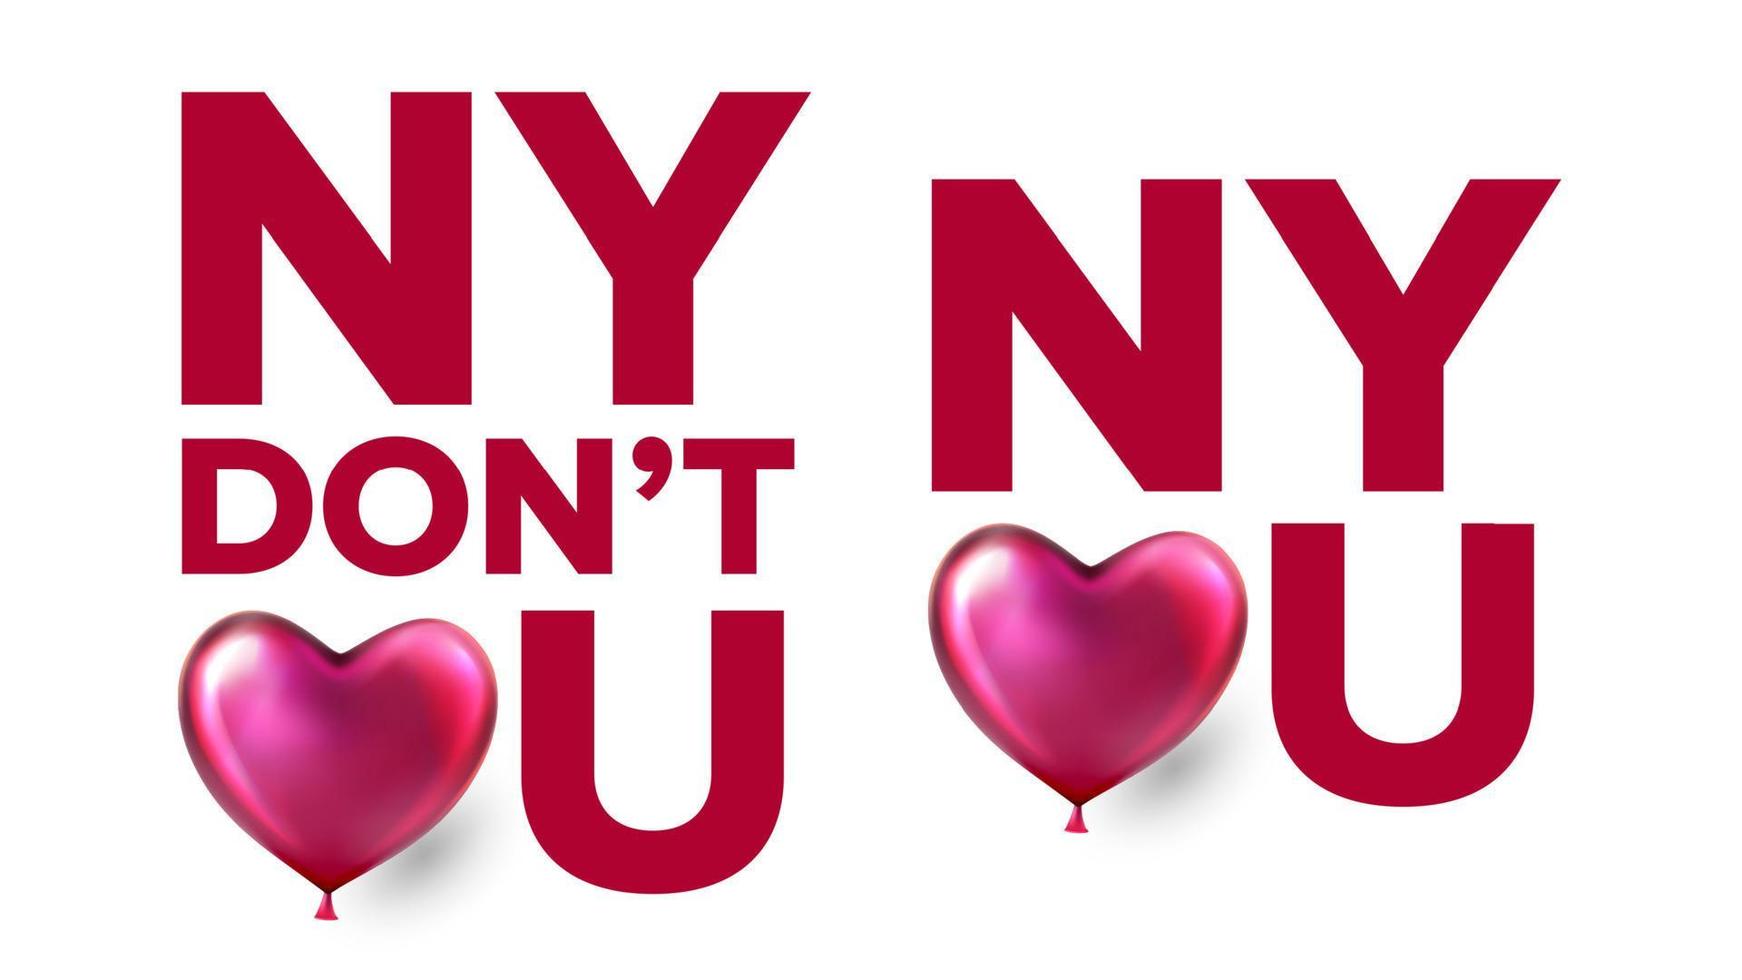 New York Love You, New York Do Not Love You Vector. City Graphic Print. Illustration vector